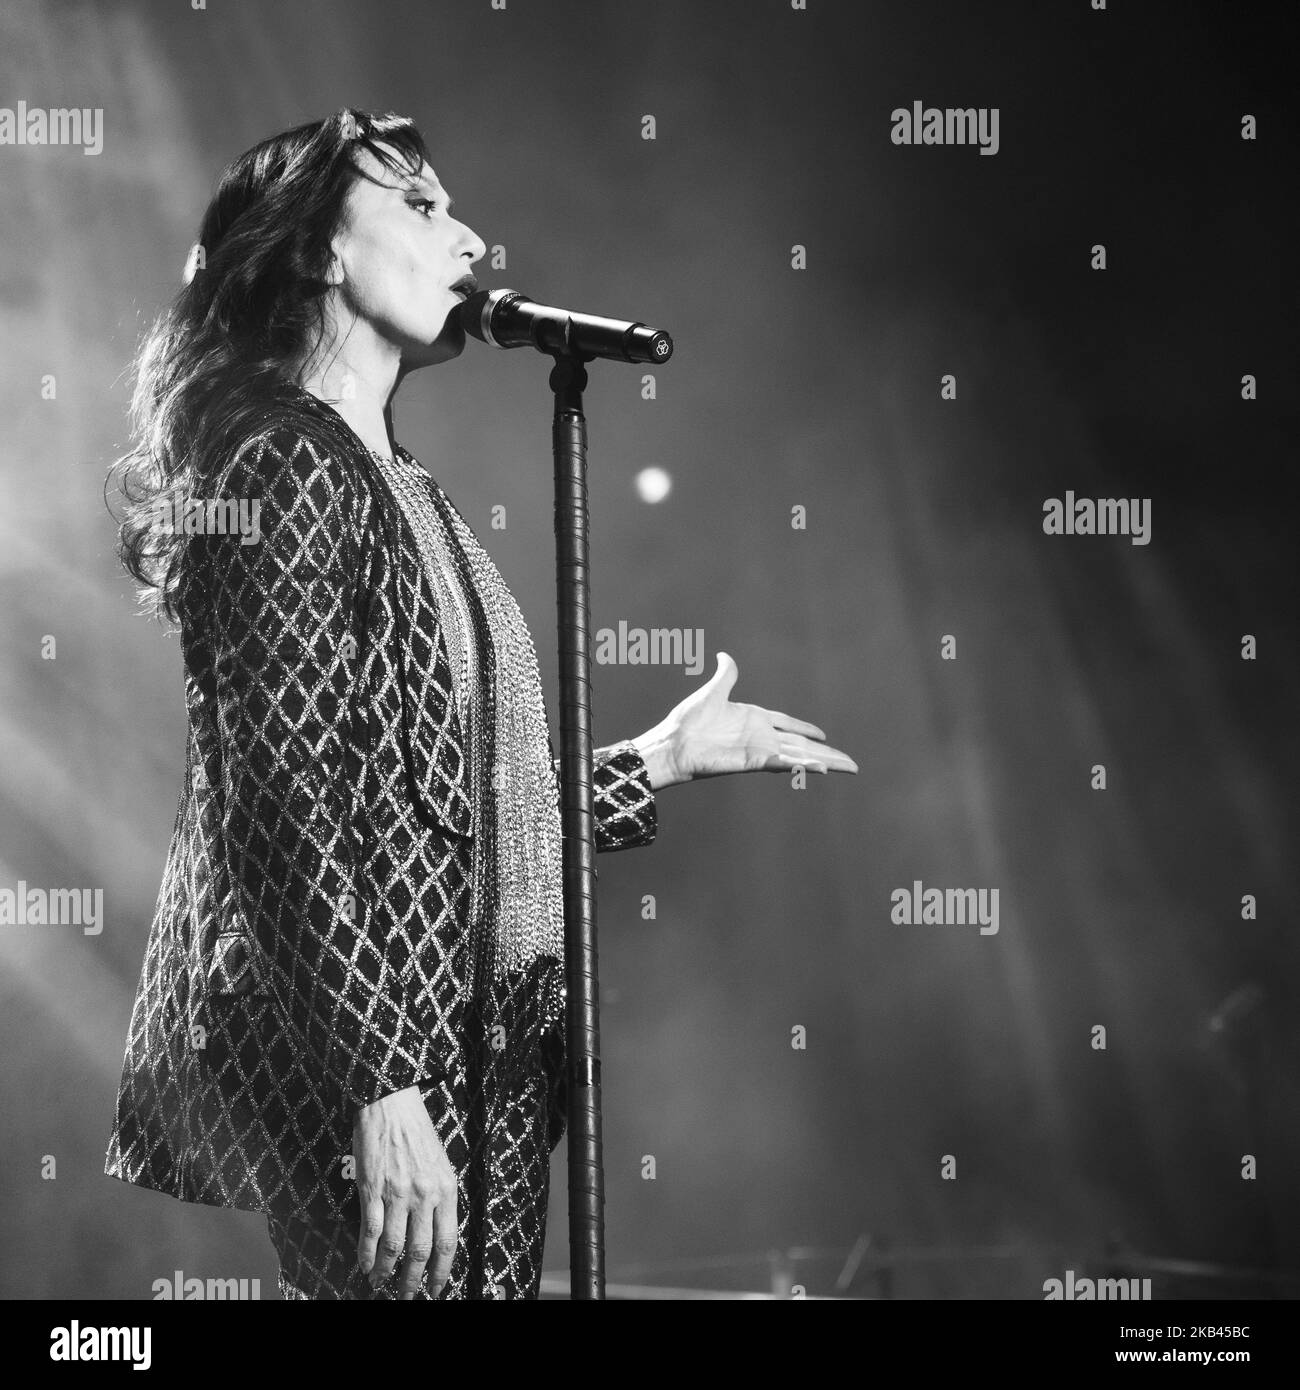 Spanish singer Luz Casal performs during a concert at WiZink Center in Madrid, Spain, 16 December 2018. (Photo by Oscar Gonzalez/NurPhoto) Stock Photo